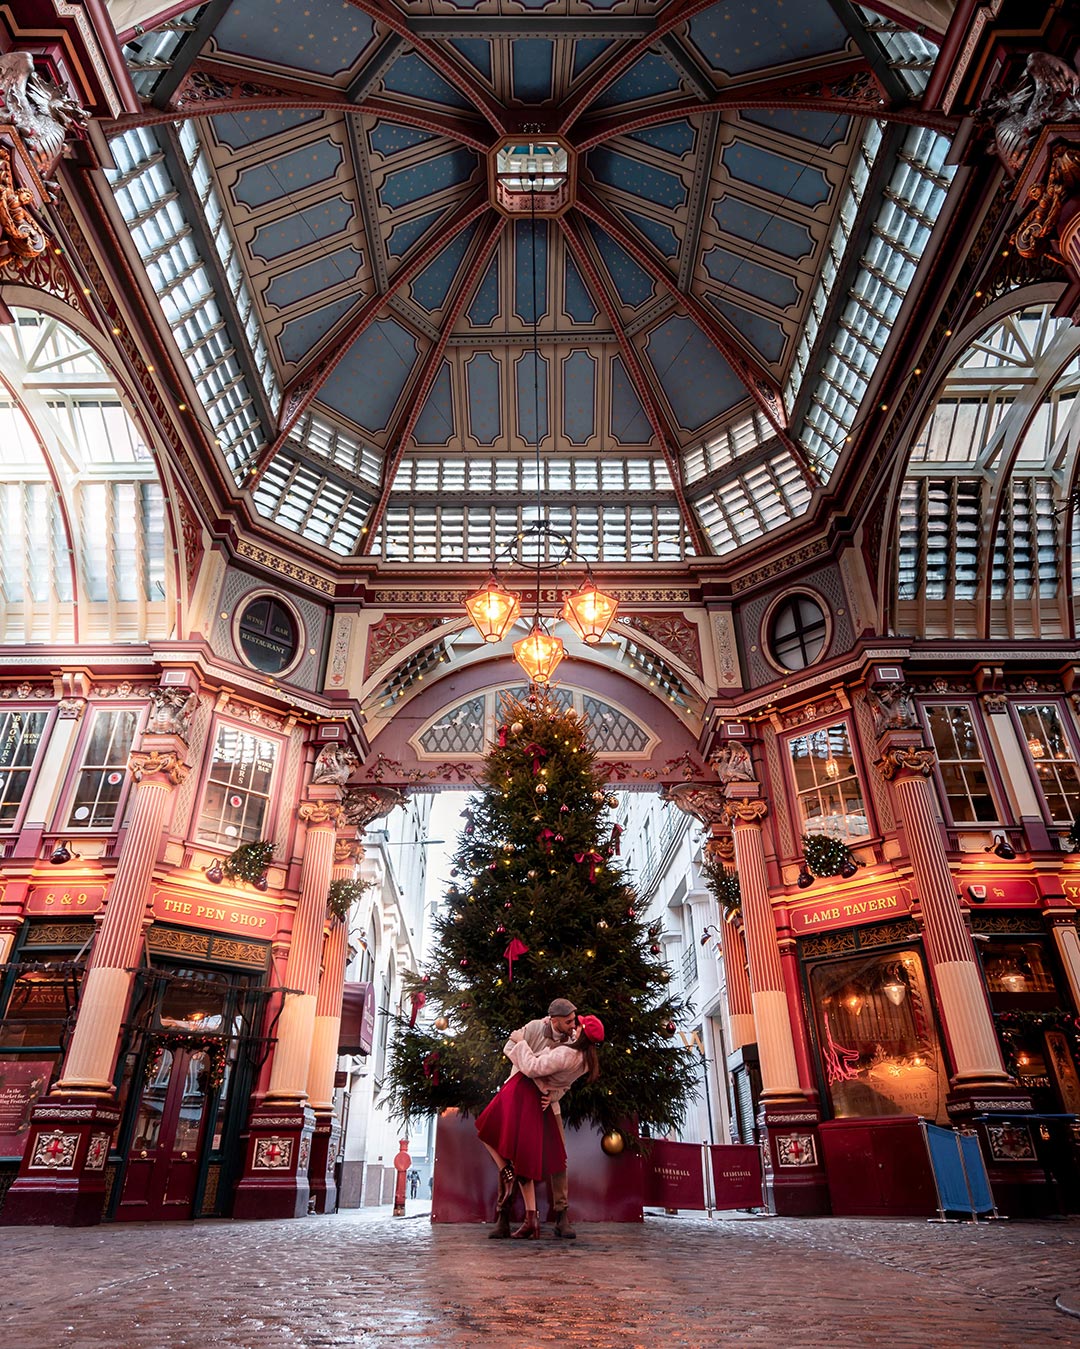 leadenhall market london instagrammable places